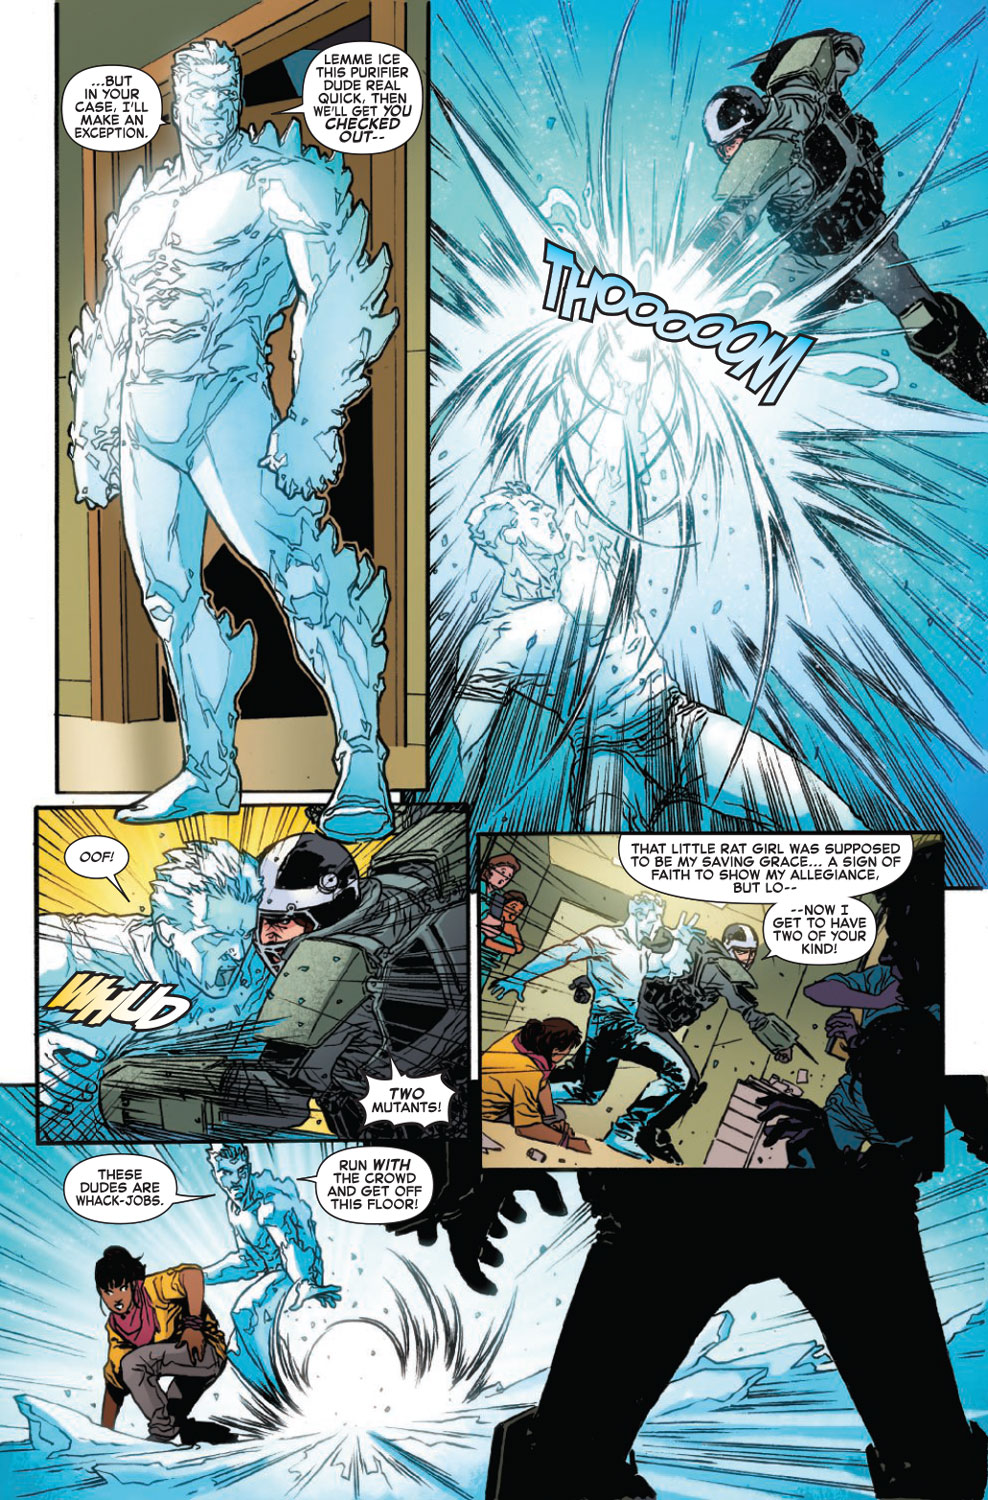 Marvel's Iceman: Sina Grace previews the series